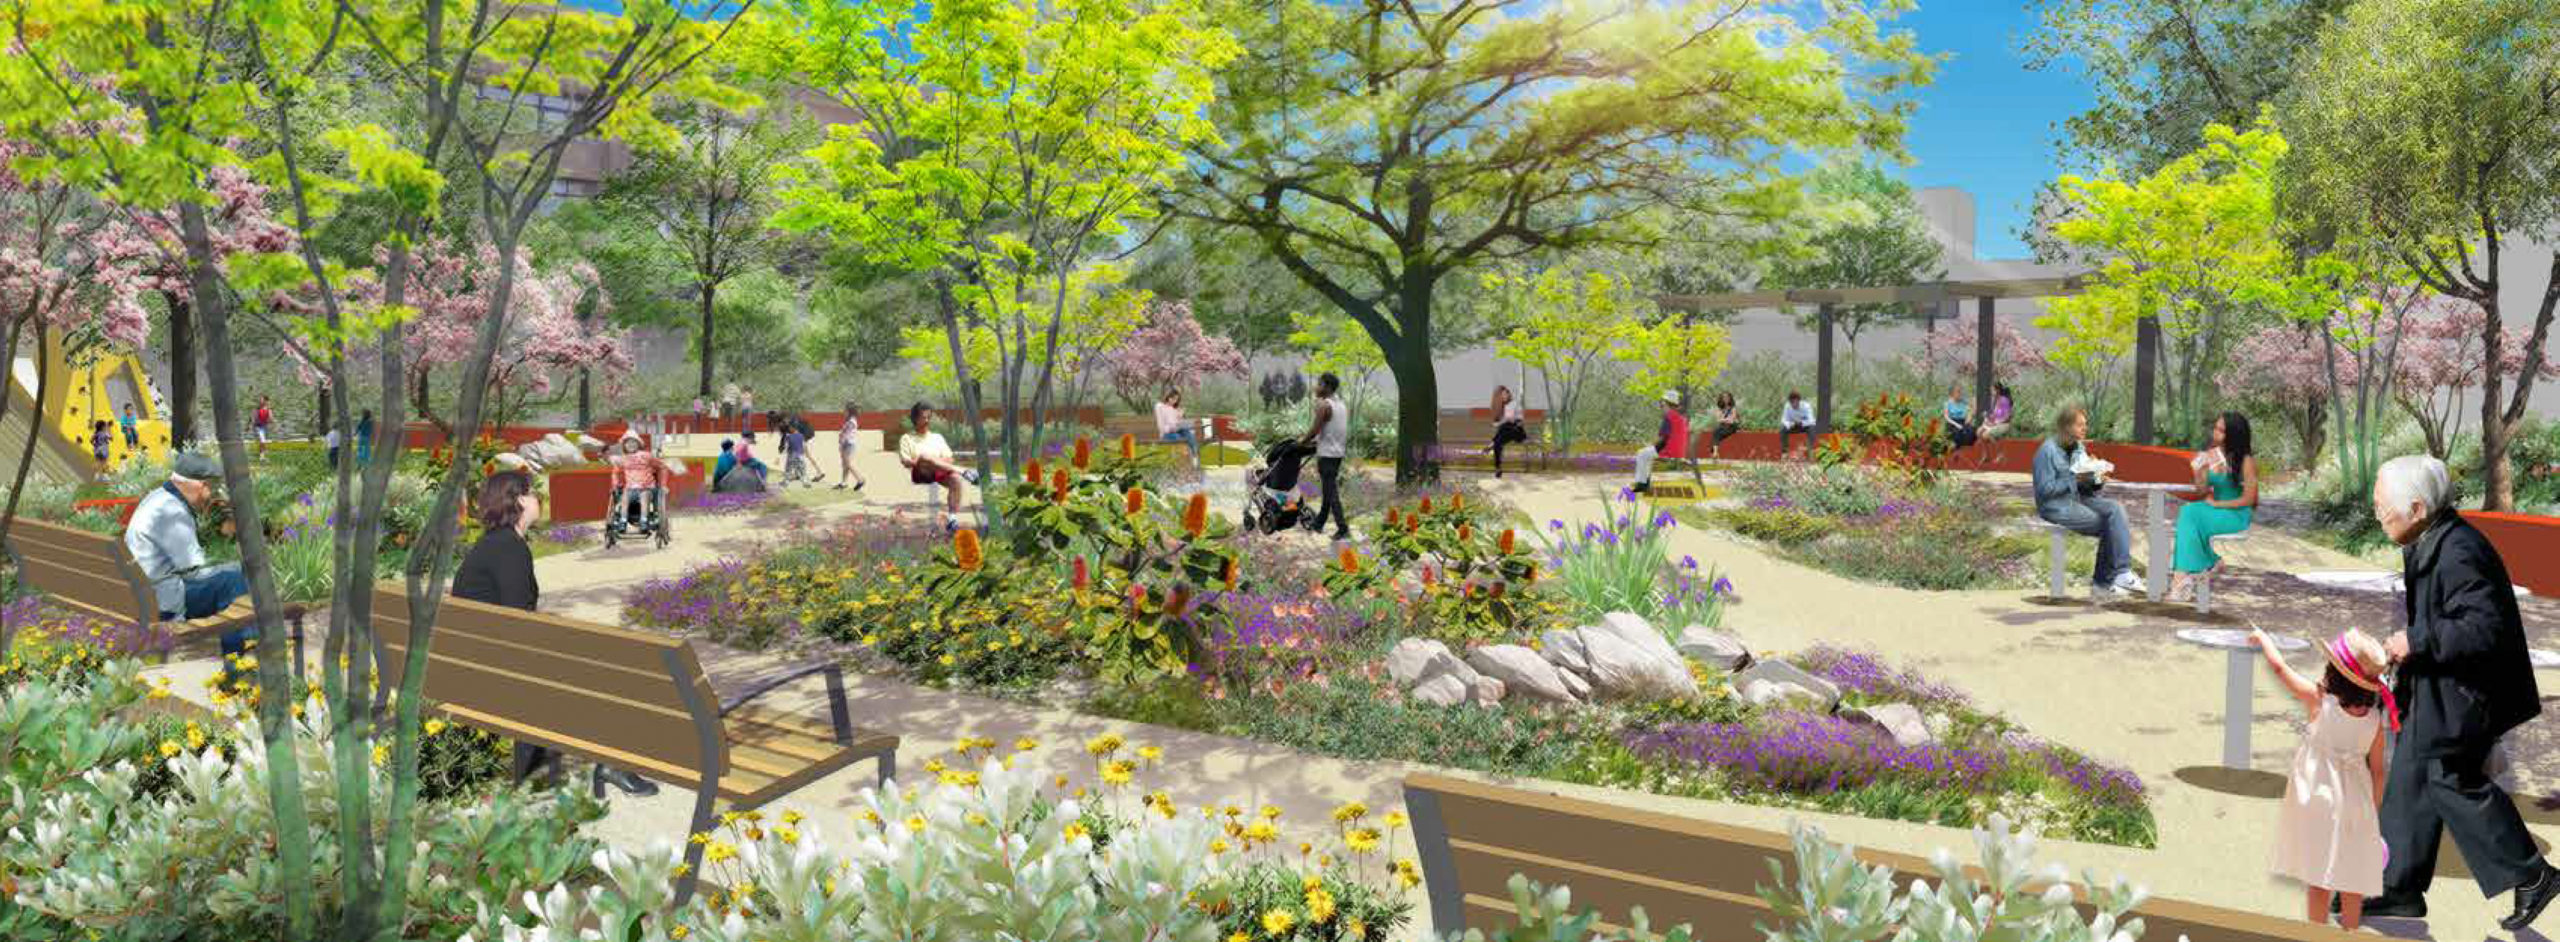 11th and Natoma Street Park visitor view, rendering by SF Public Works